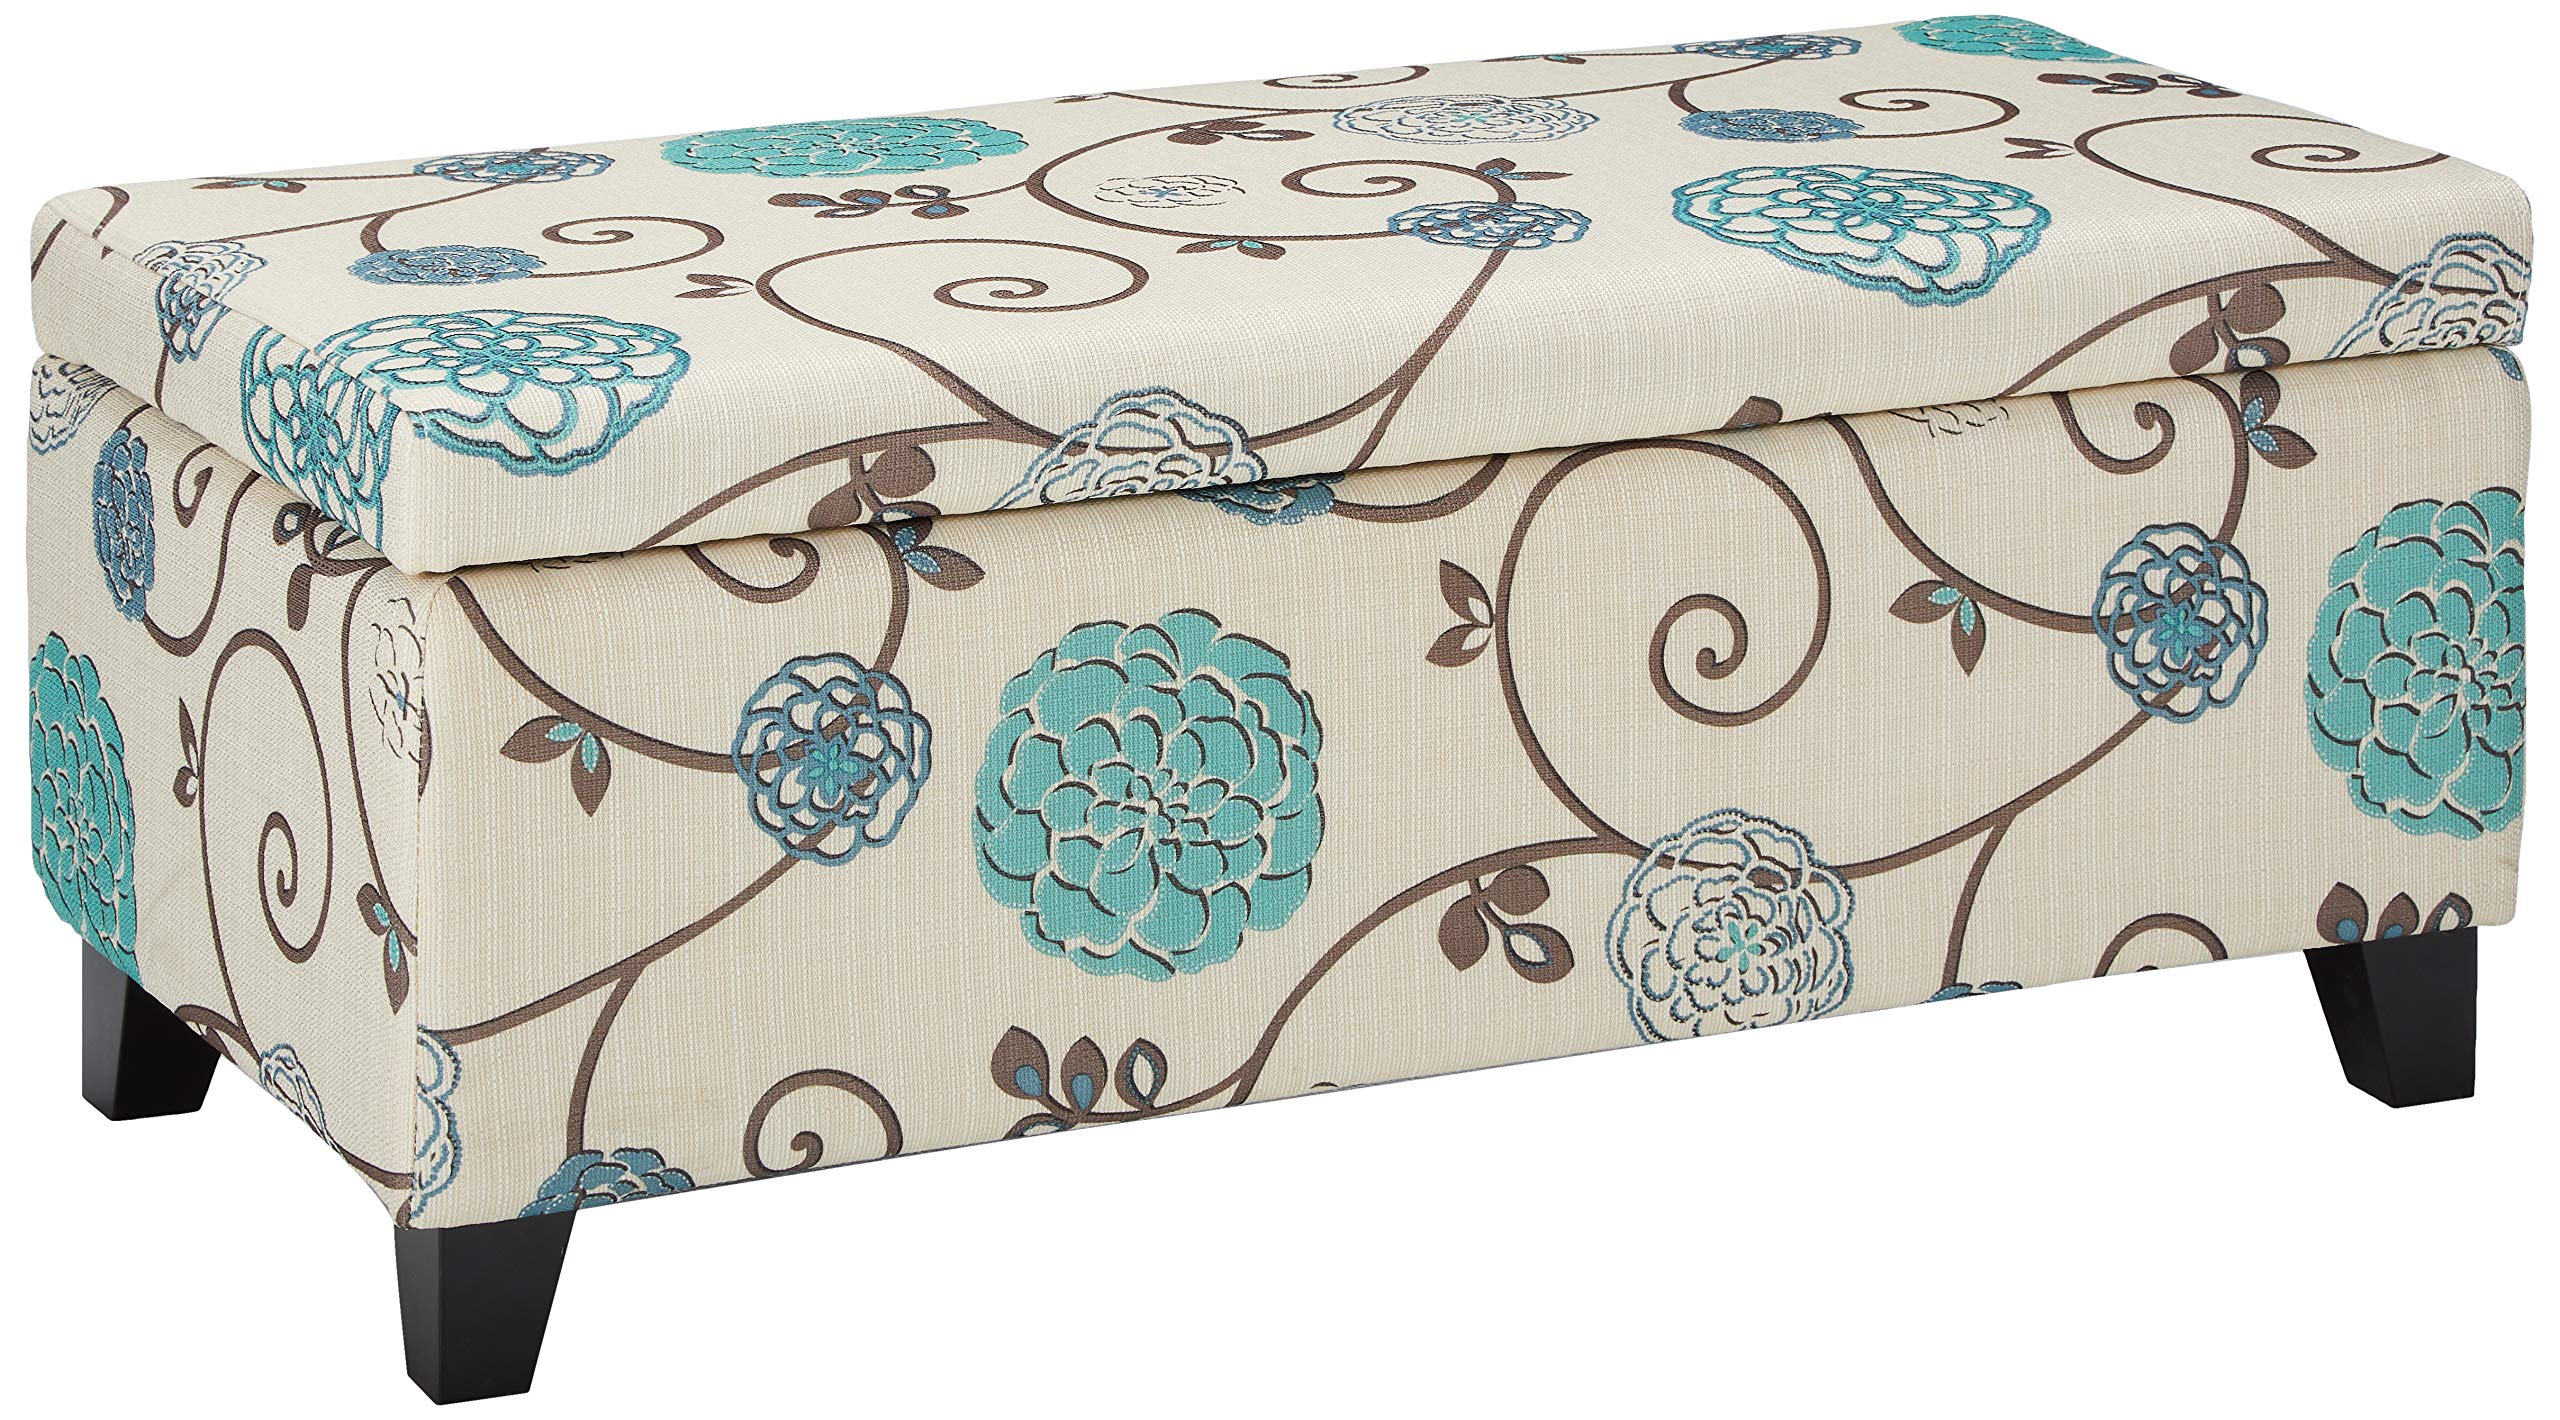 39" Christopher Knight Home Breanna Fabric Storage Ottoman (White & Blue Floral) $67.80 + Free Shipping